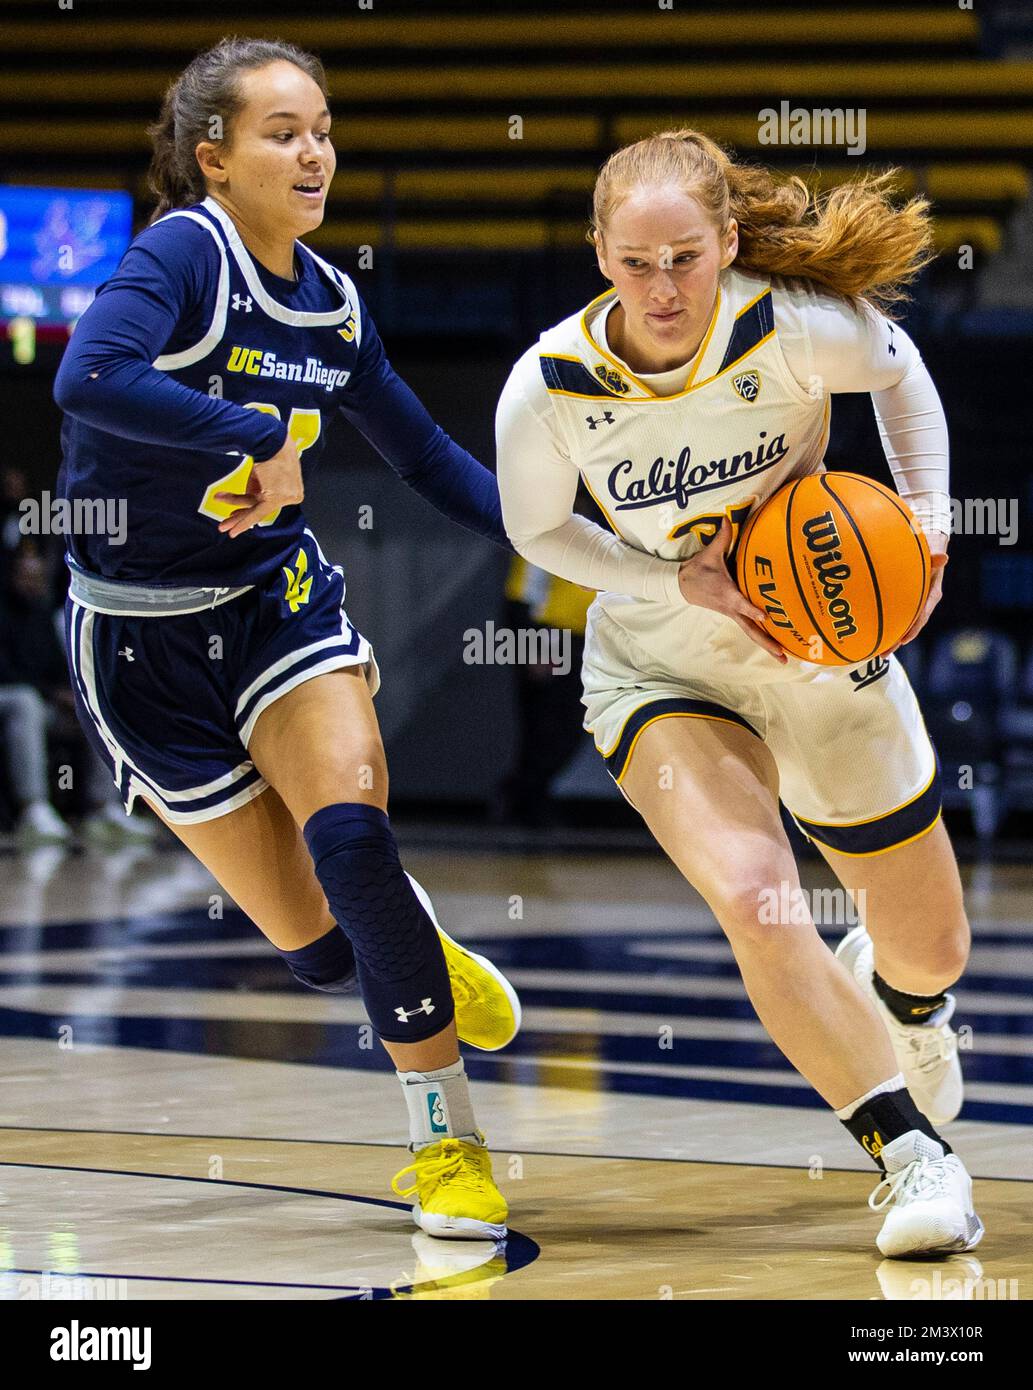 Berkeley, CA U.S. 16th Dec, 2022. A. California guard Ornela Muca (31)drives to the hoop during the NCAA Women's Basketball game between UC San Diego and the California Golden Bears. California beat UC San Diego 75-61 at Haas Pavilion Berkeley Calif. Thurman James/CSM/Alamy Live News Stock Photo